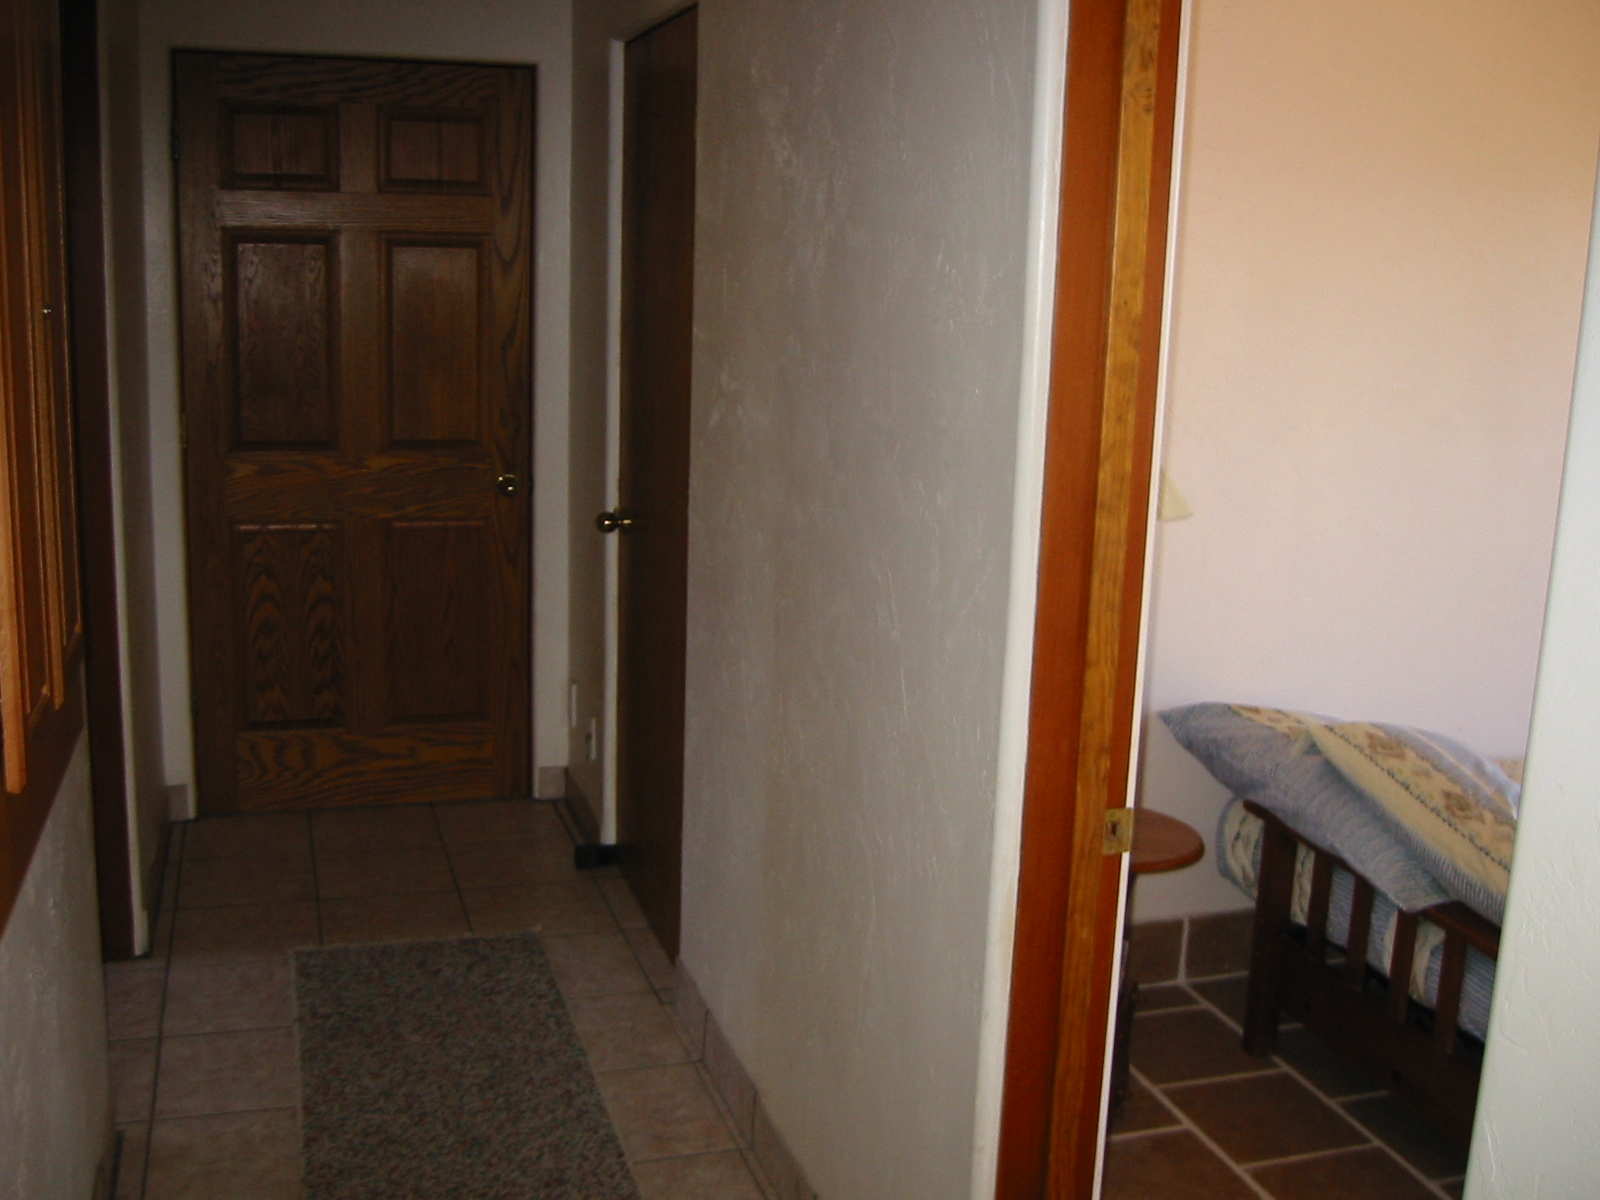 But then he showed me this random door at the end of the hallway..  He said that's where the room was, so i walked in.